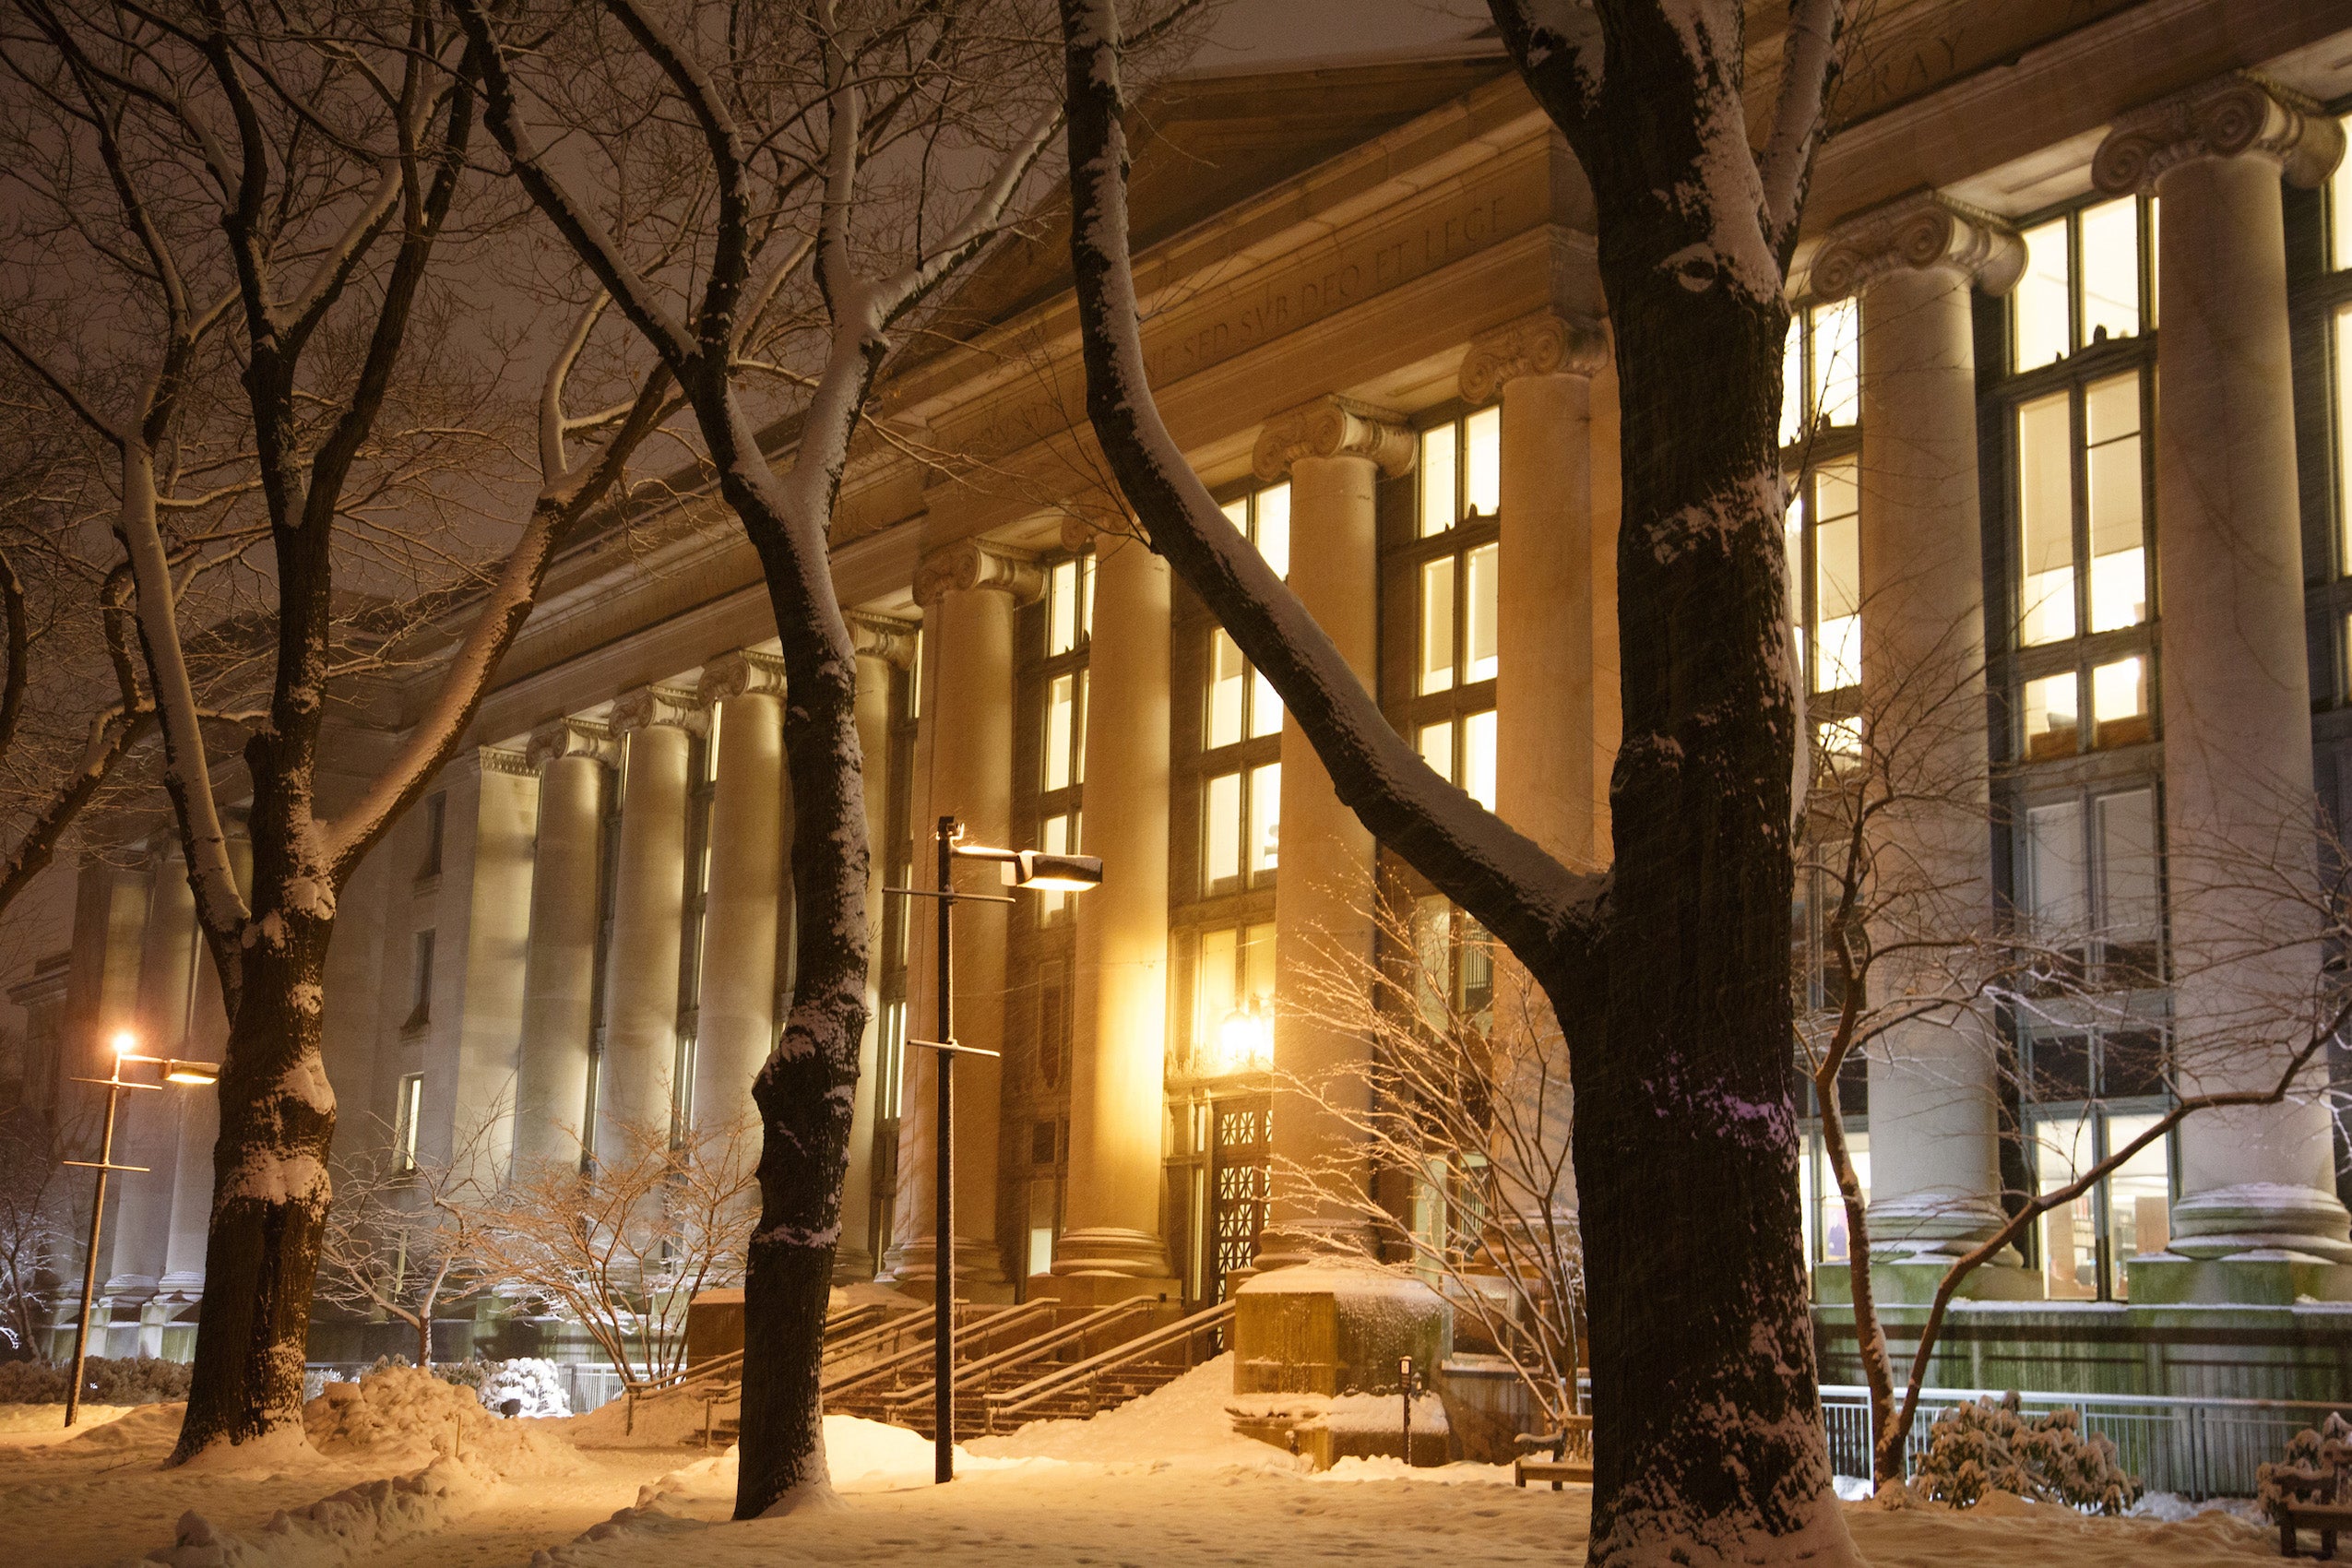 Langdell Hall in the snow at night